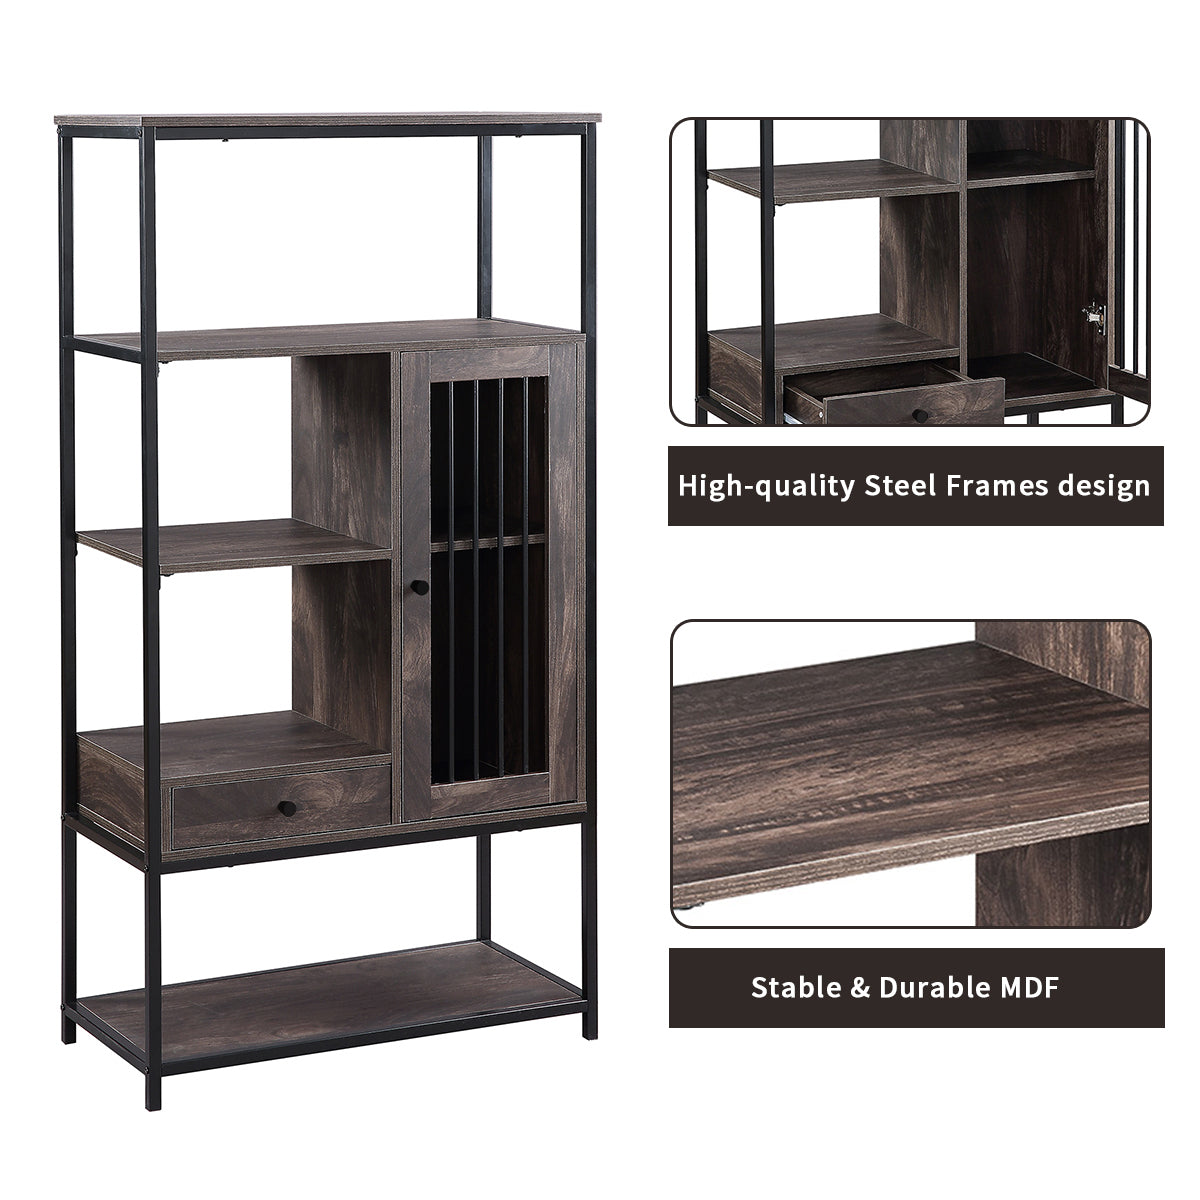 Parquan 5 Tier Display Shelf with Doors and Drawers